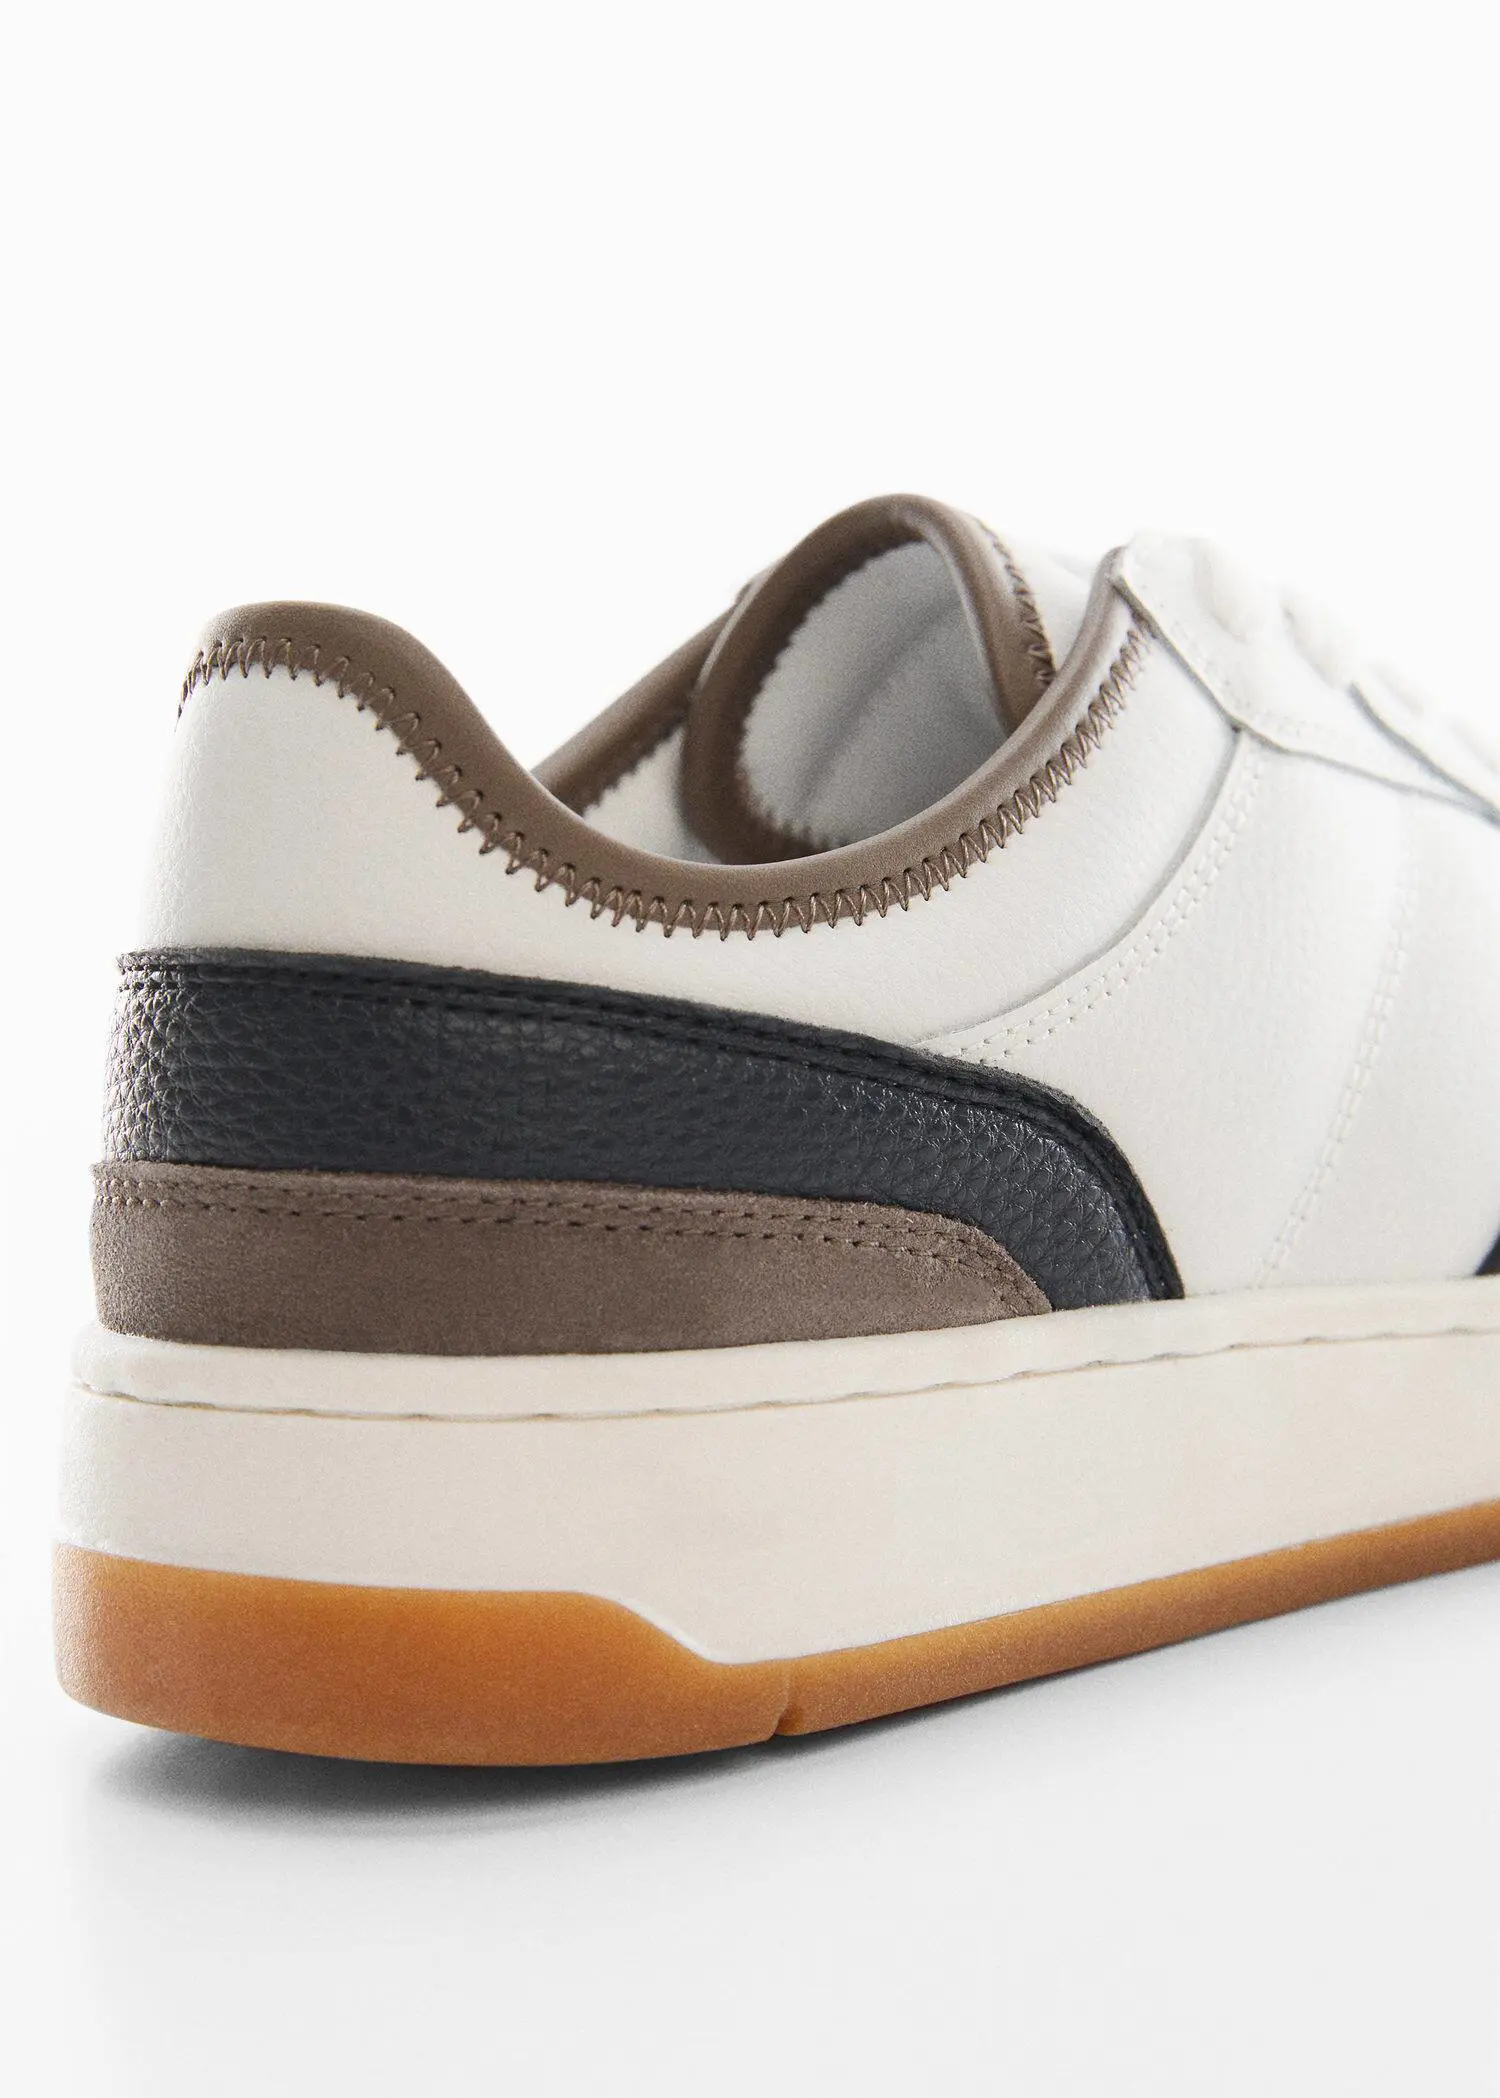 Mango Combined leather trainers. 3